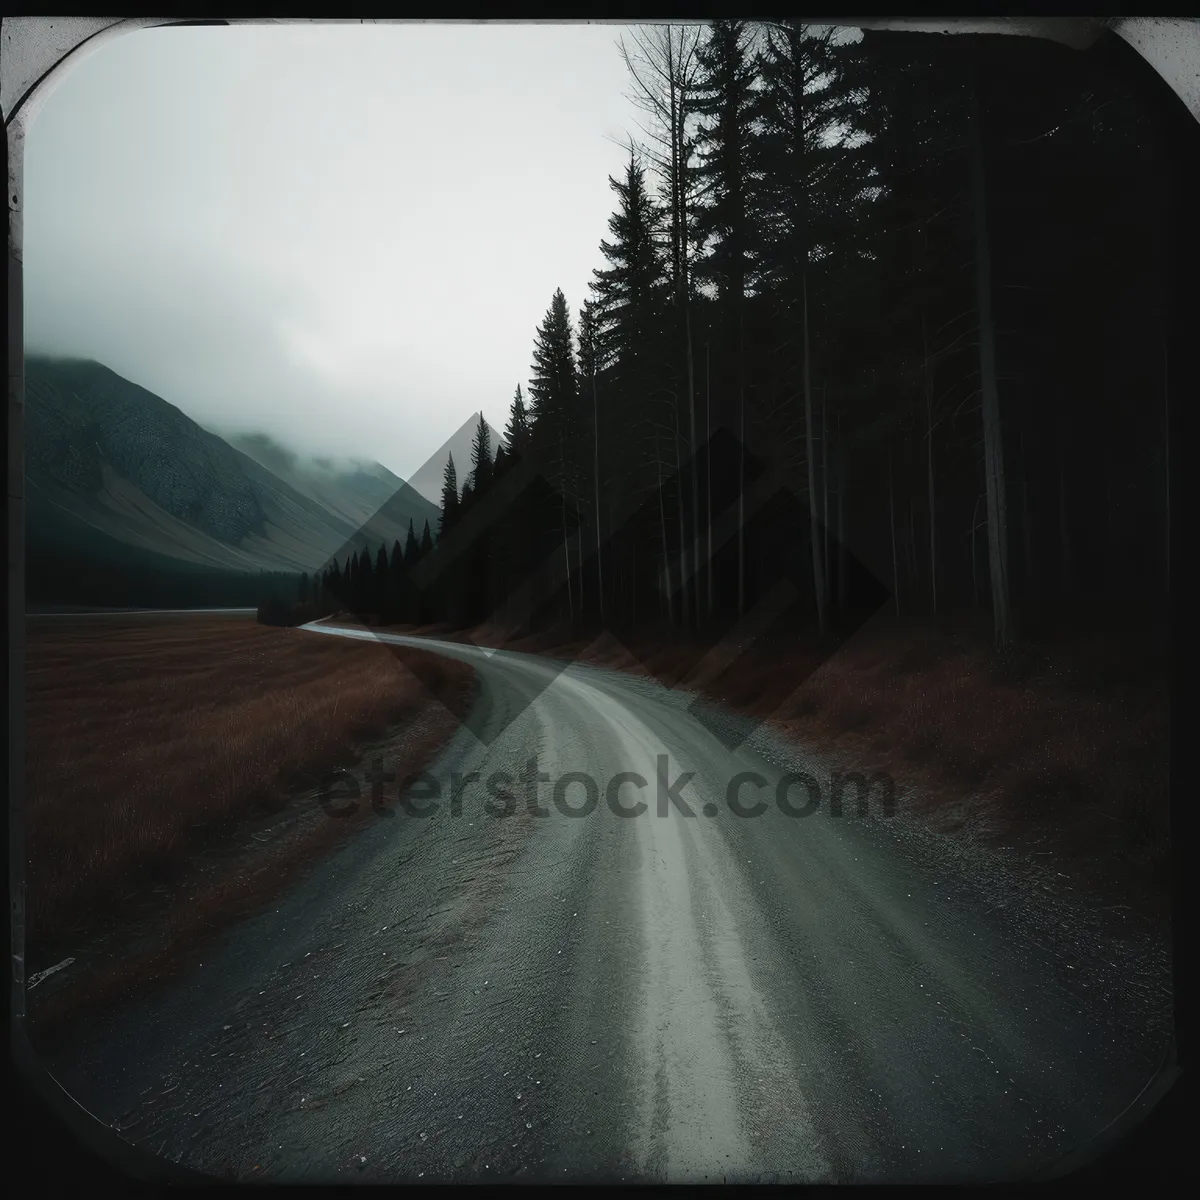 Picture of Speedy Drive: Car Mirror Reflecting Highway Landscape